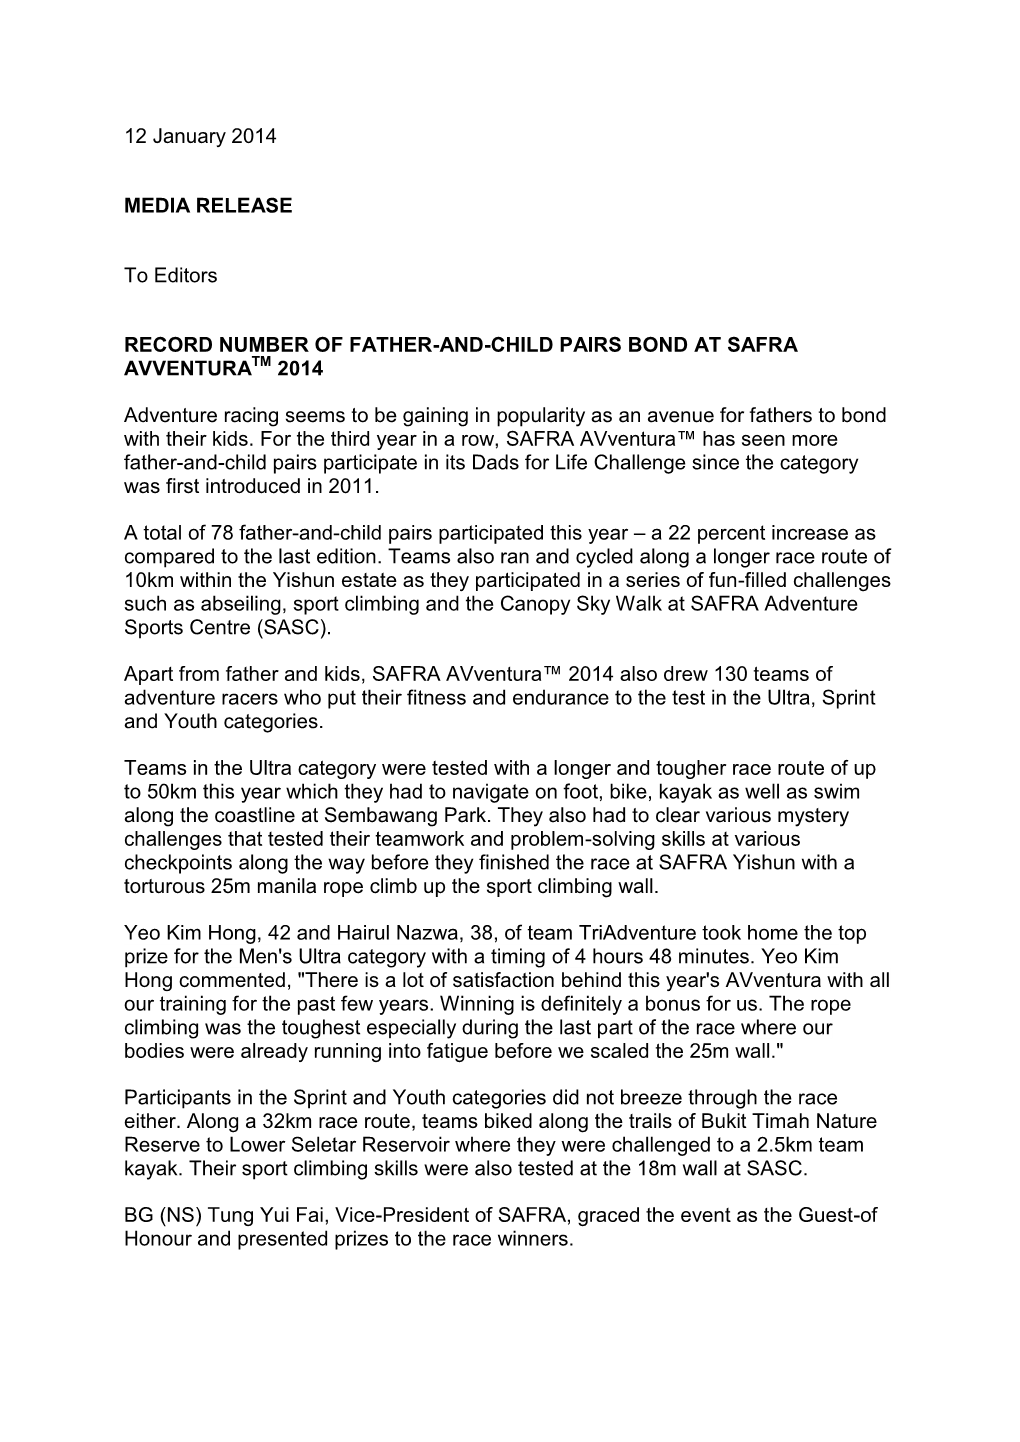 12 January 2014 MEDIA RELEASE to Editors RECORD NUMBER OF